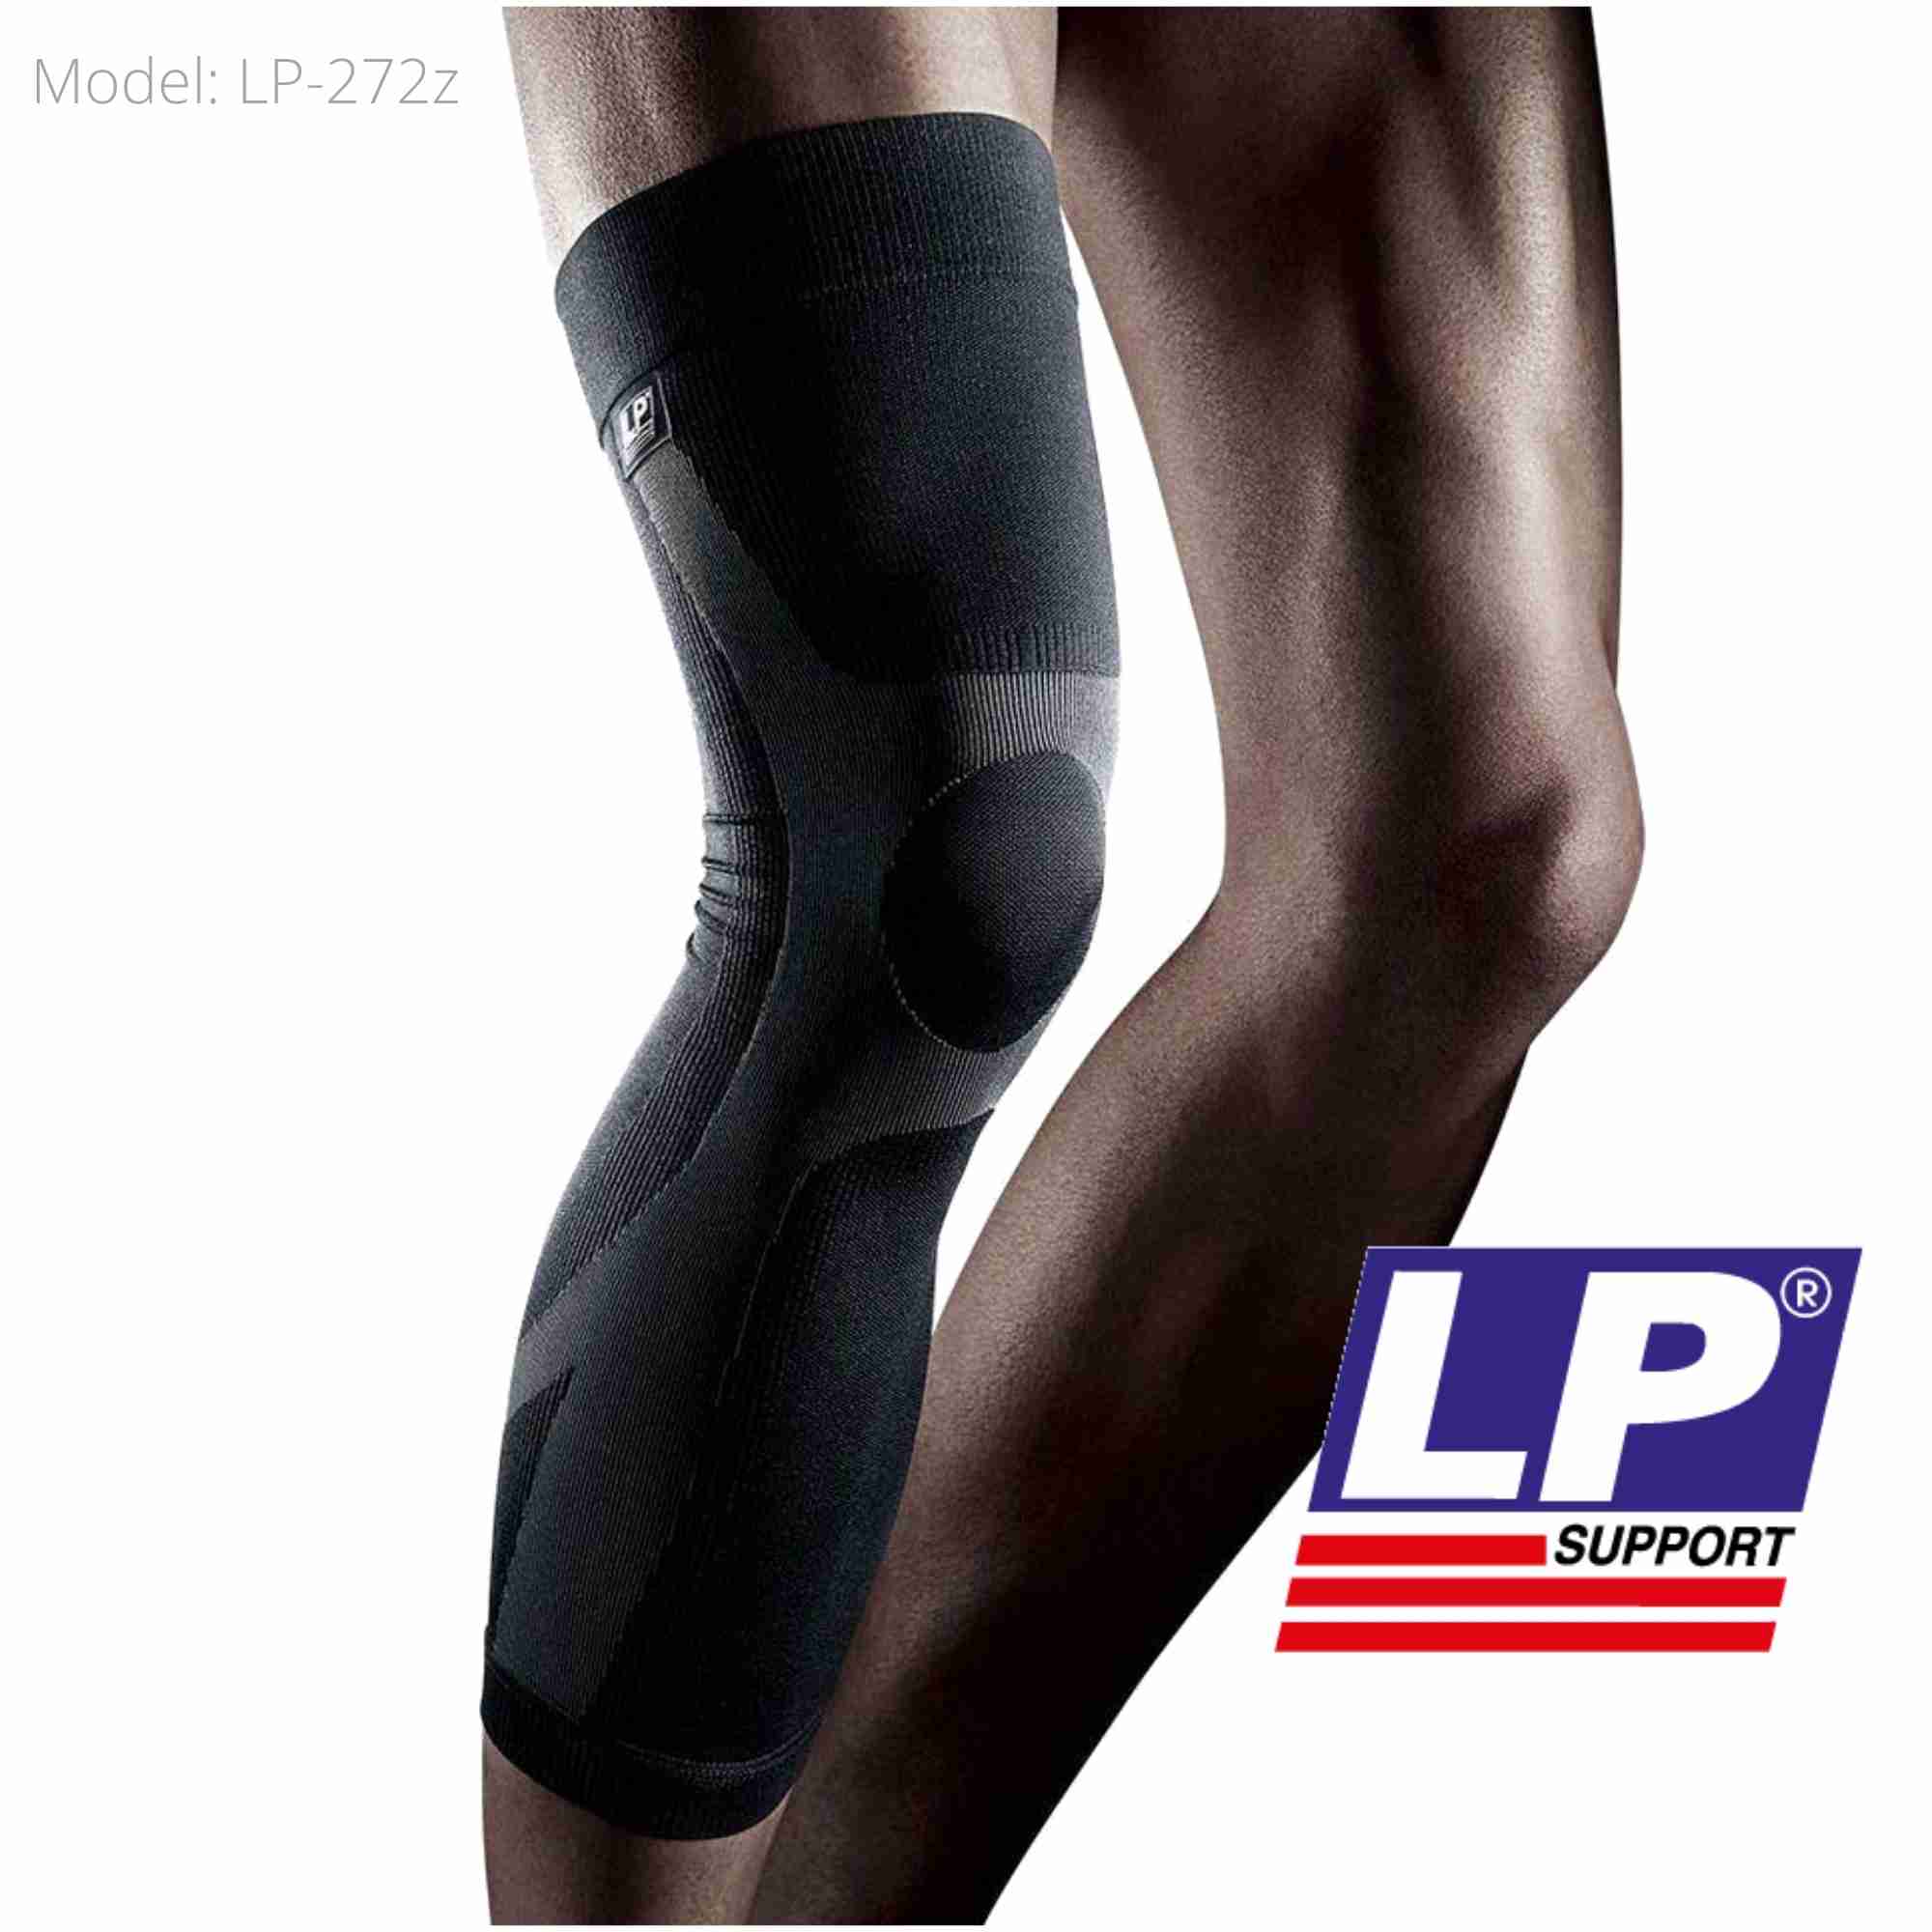 LP 272z Leg Compression Sleeve (LP Support / Authentic / High Quality)